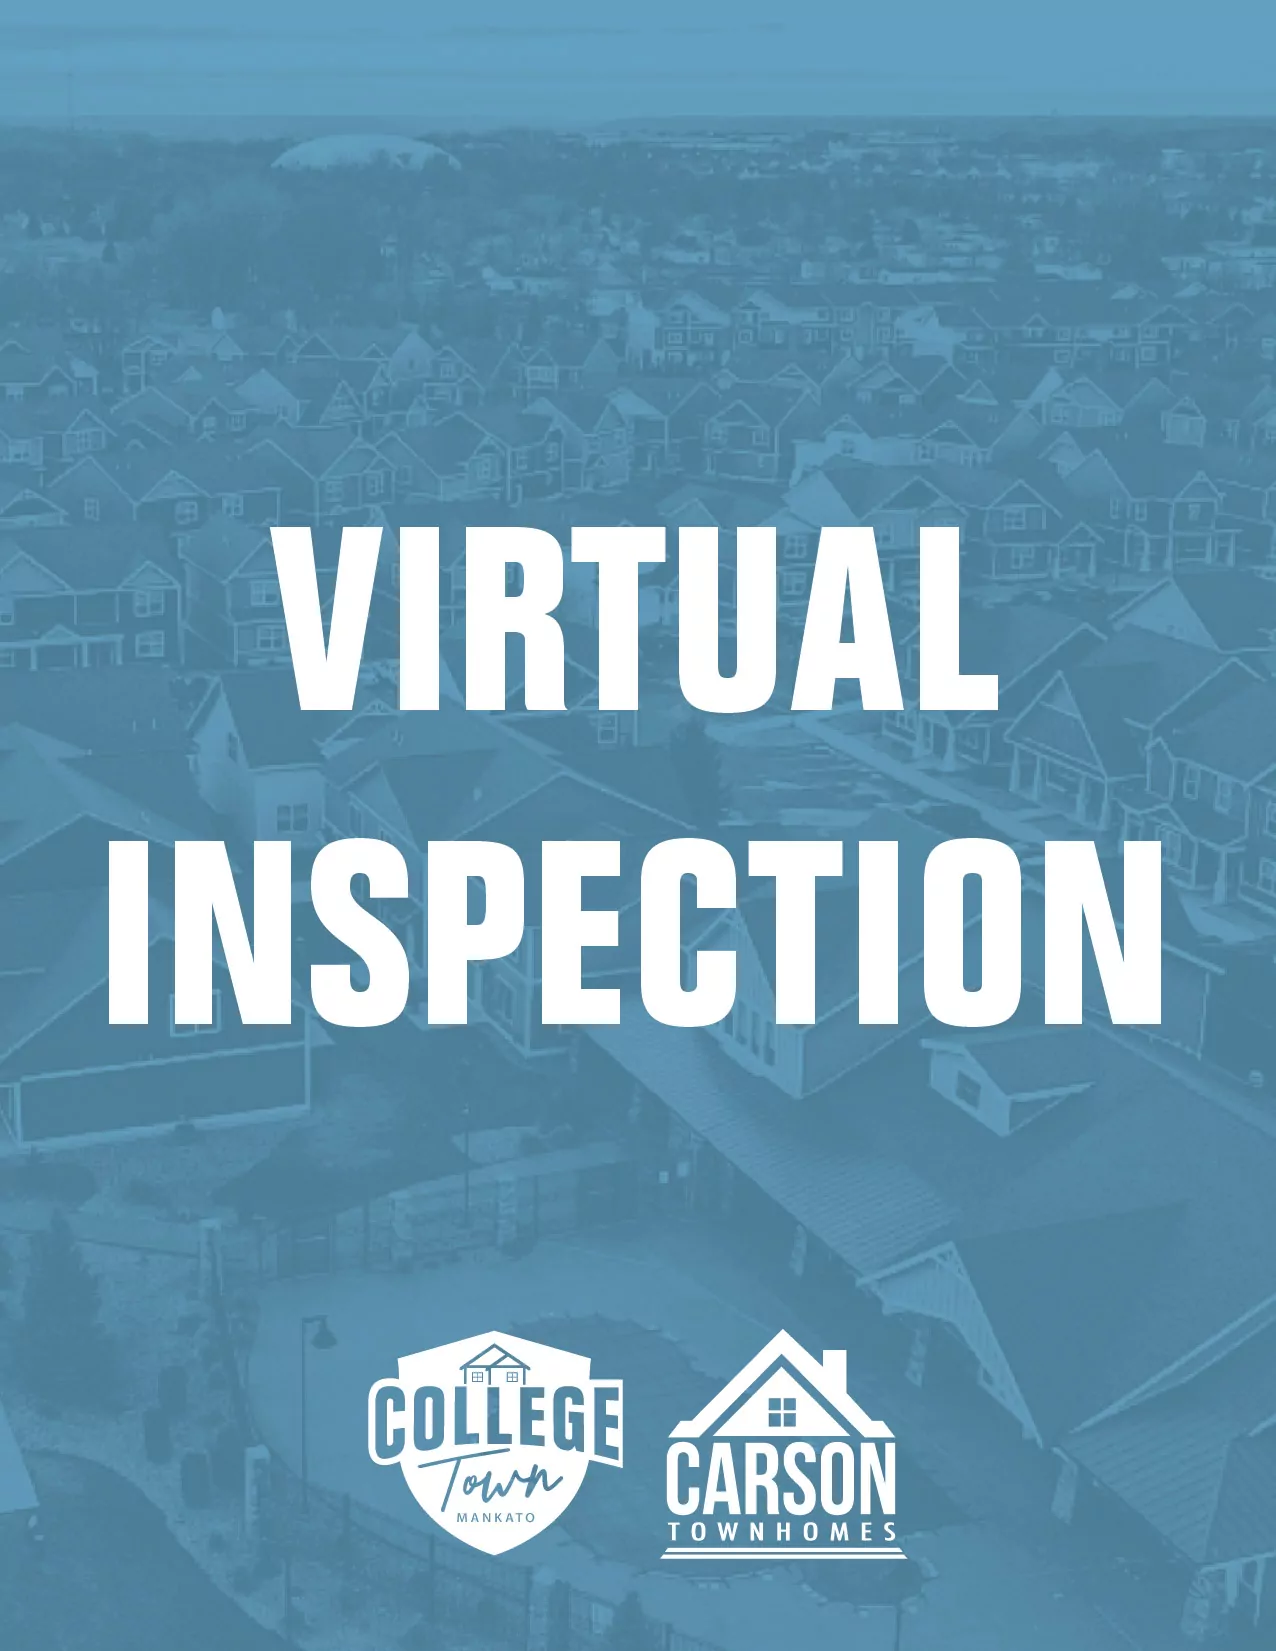 Virtual Inspections Link